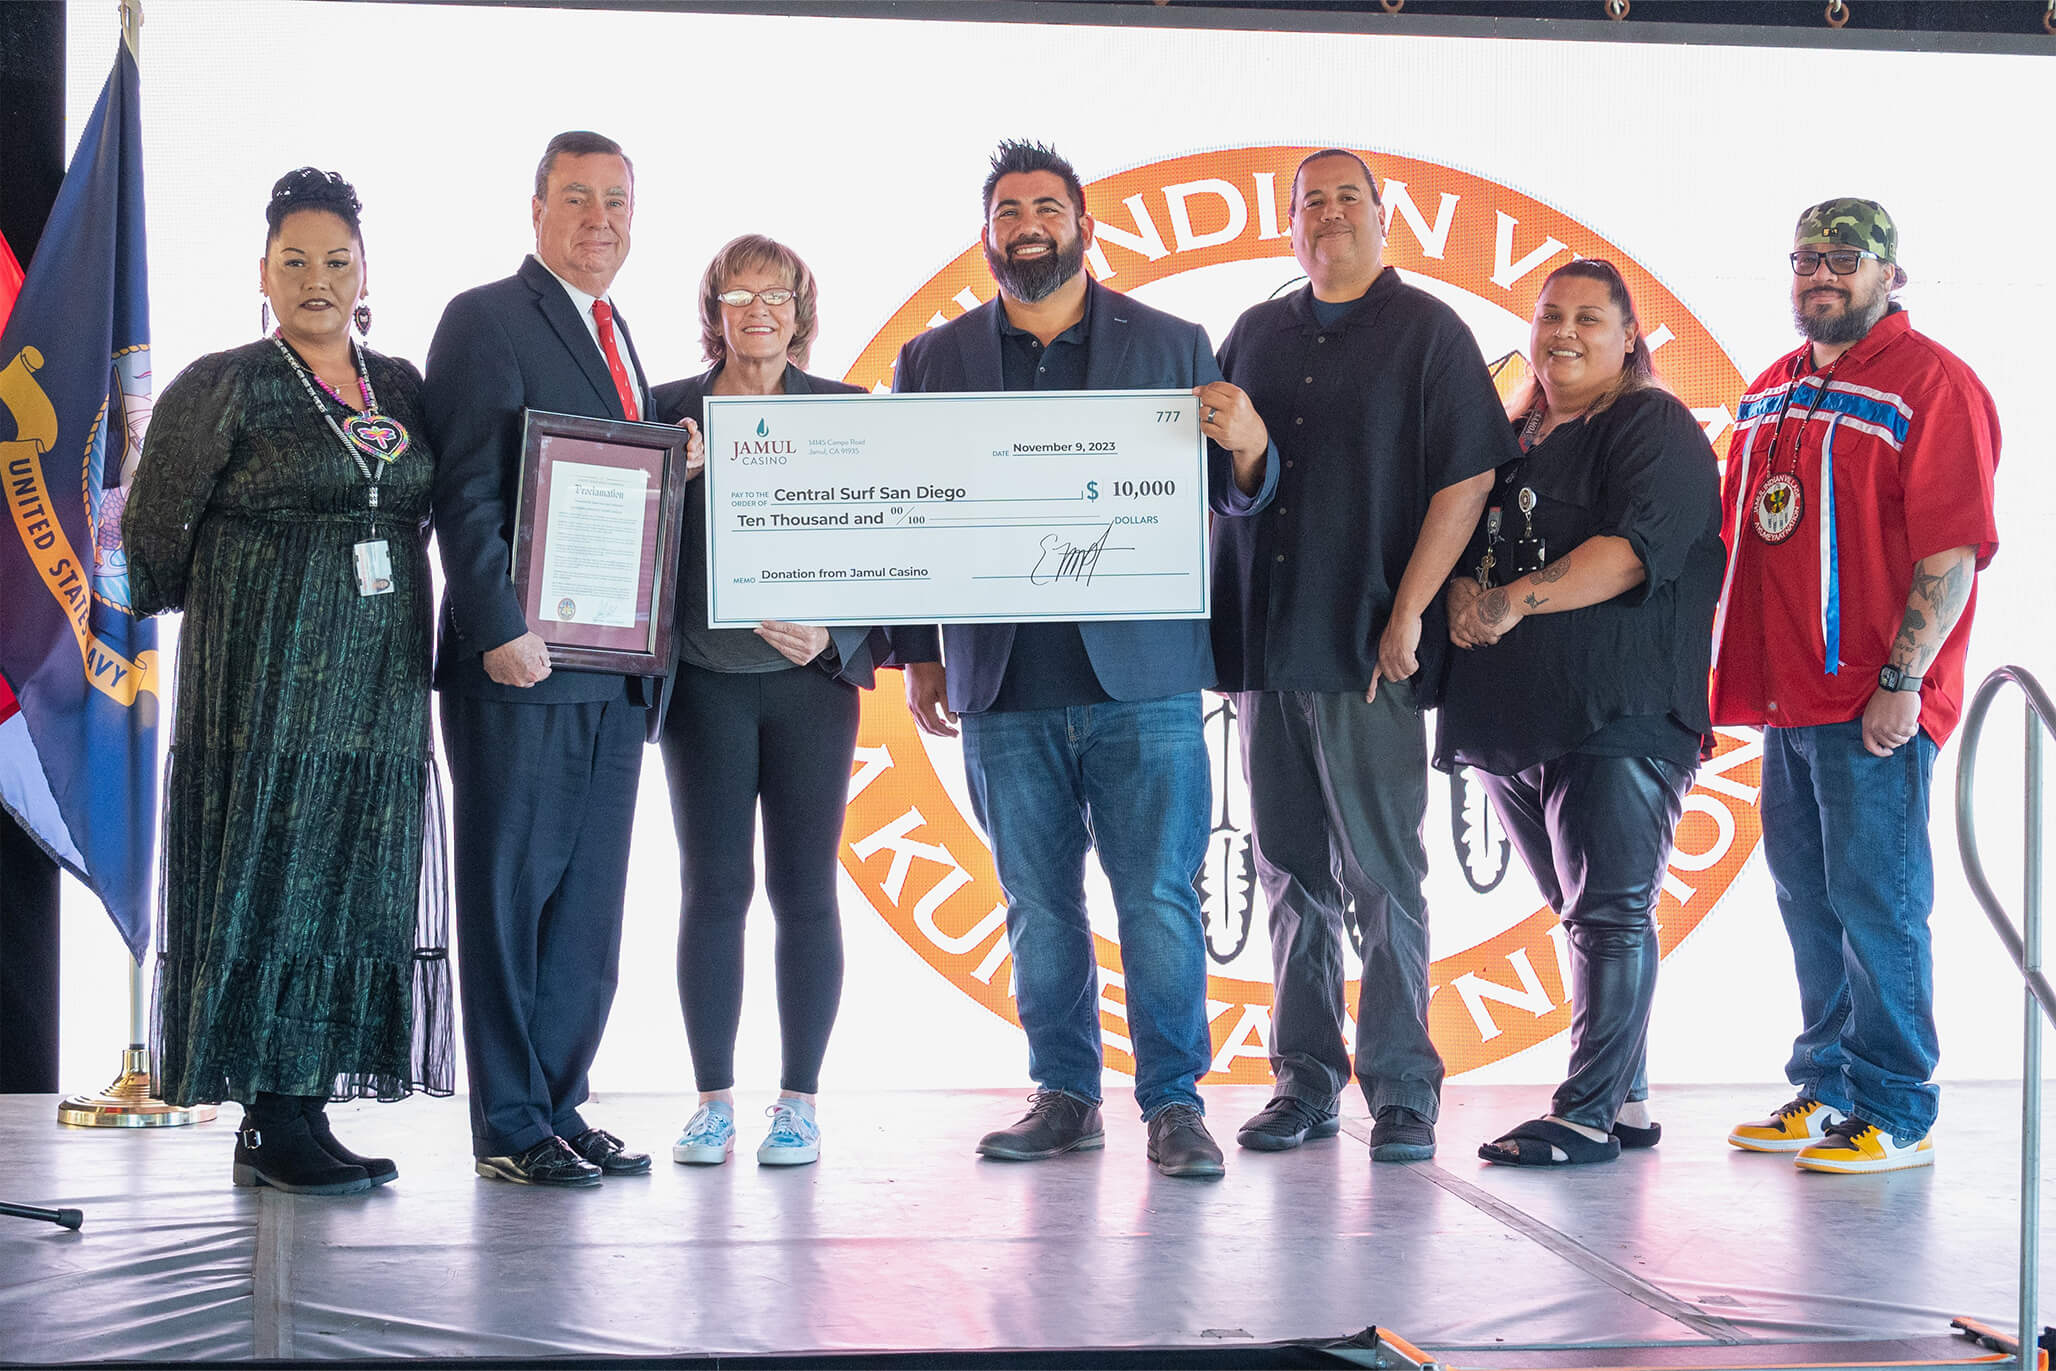 San Diego Supervisor Joel Anderson and Jamul Casino honor veterans with a charitable donation, reflecting their strong community support.